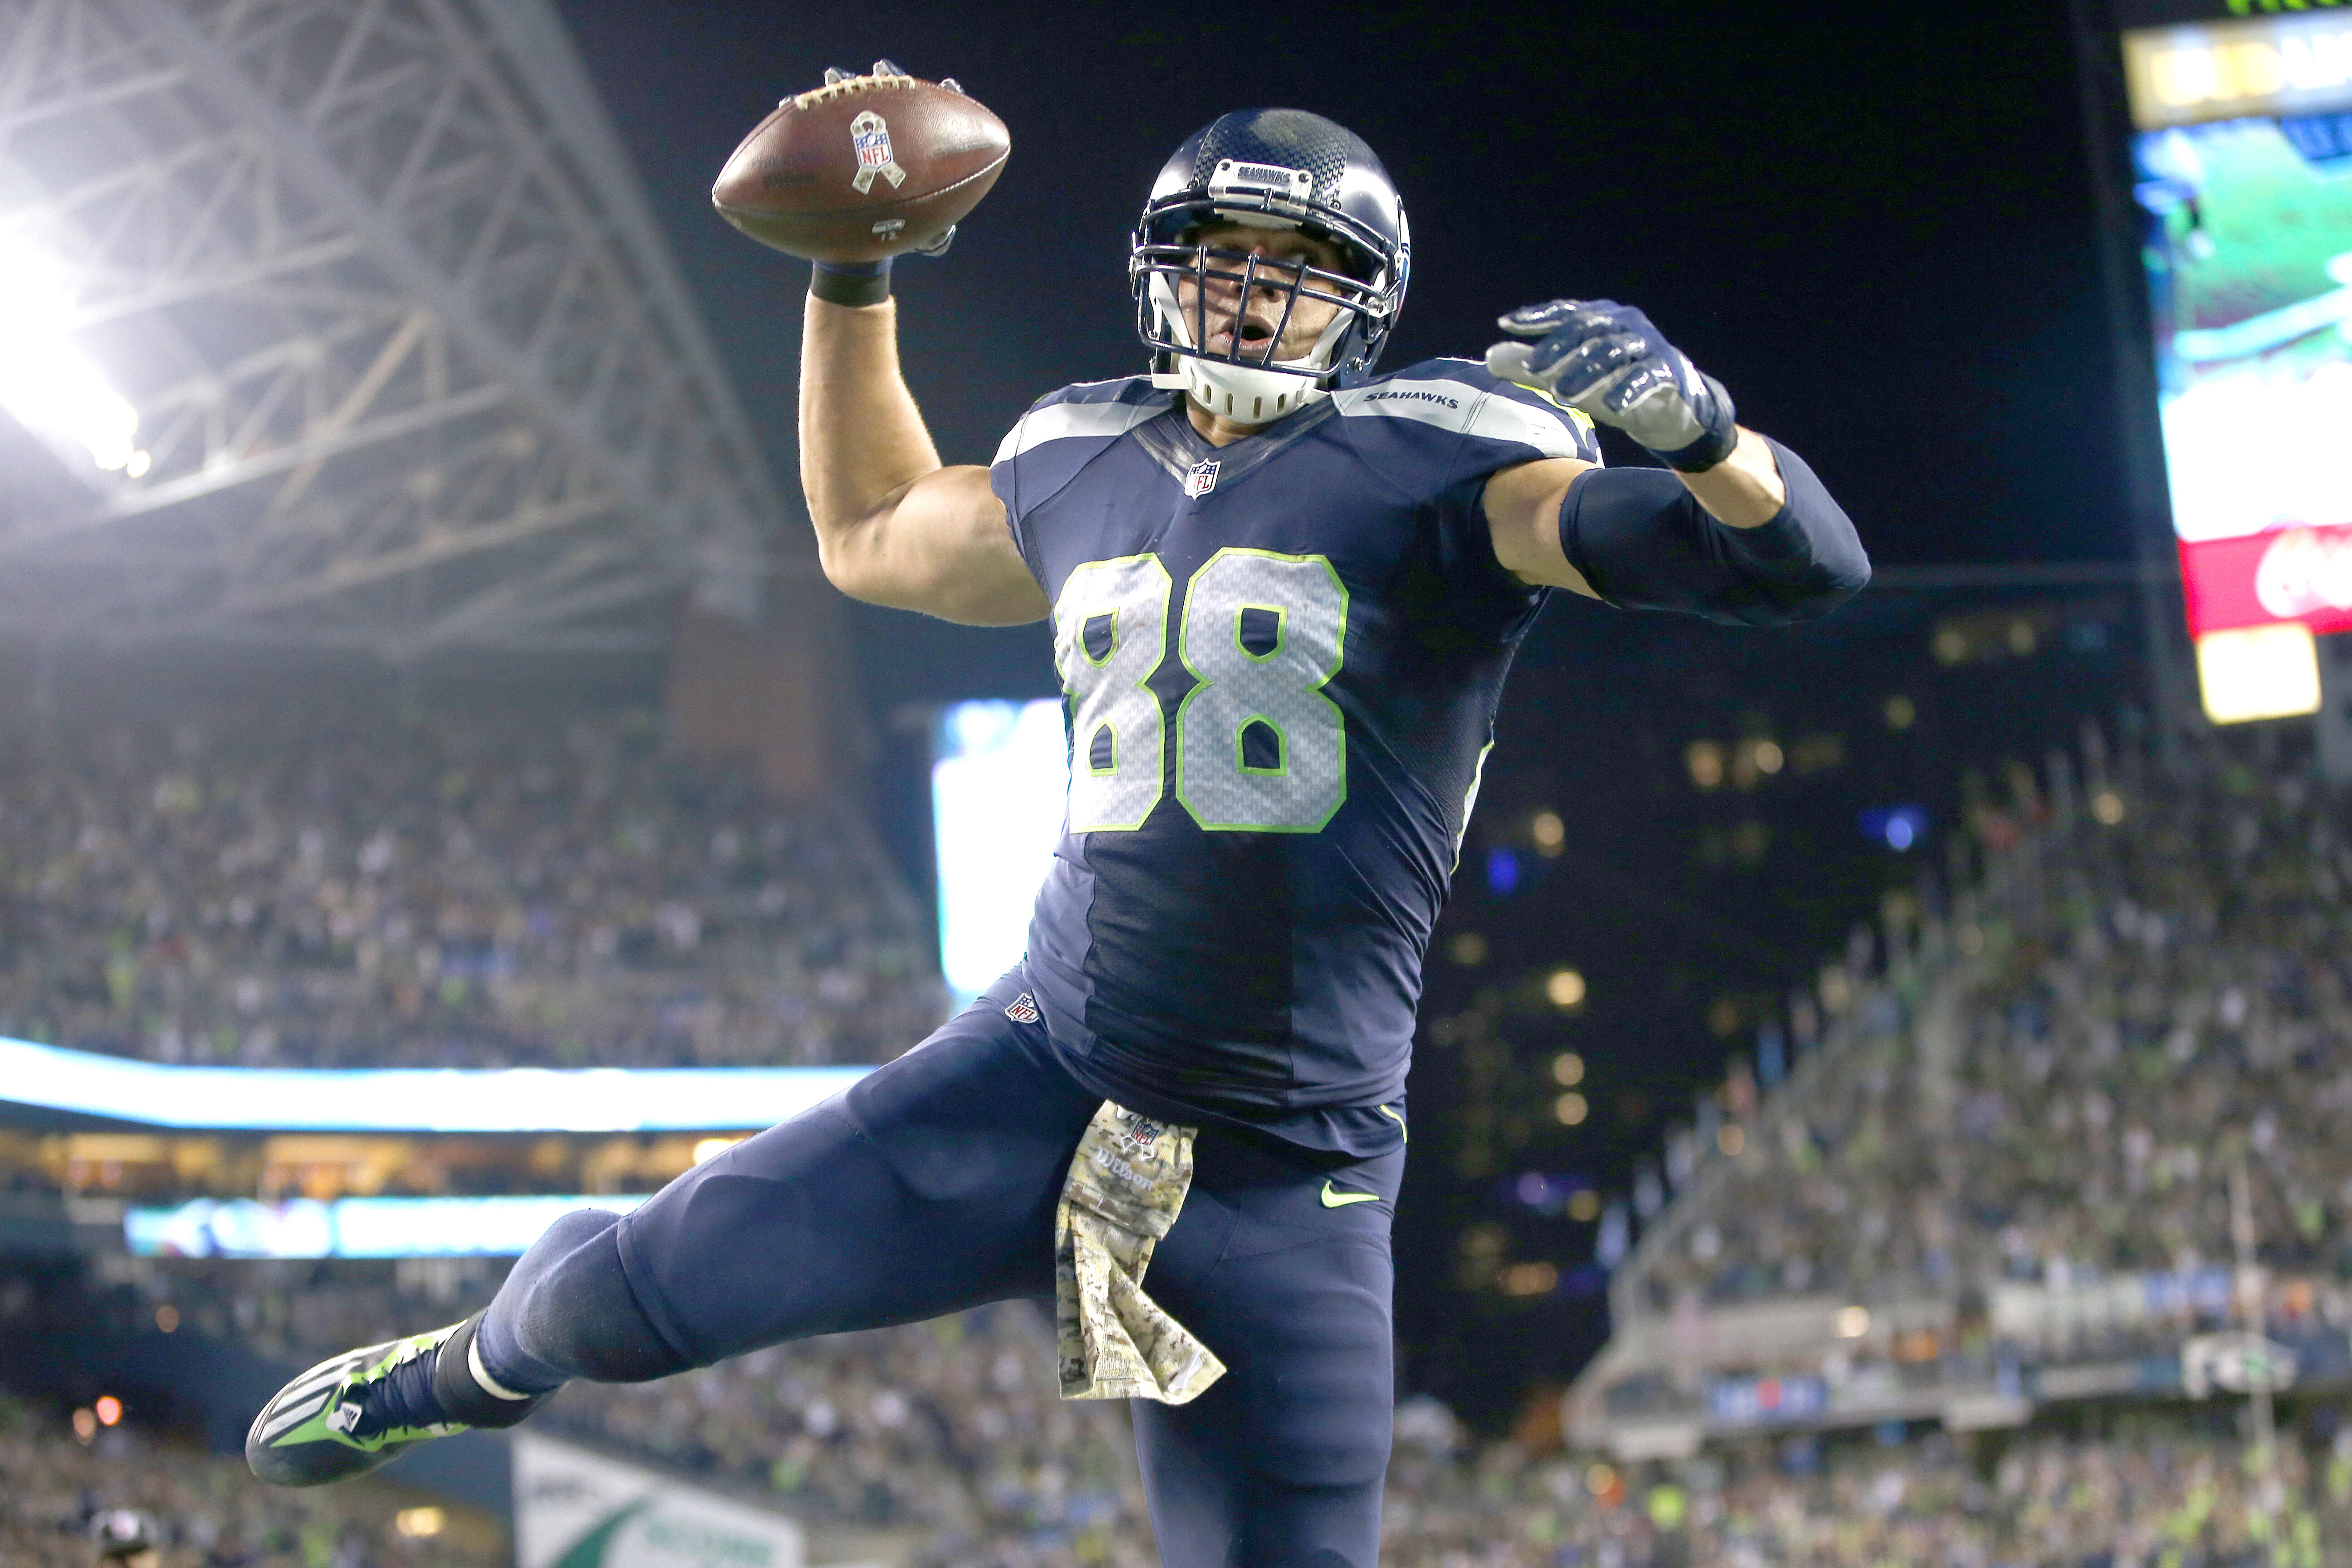 SEATTLE, WA - NOVEMBER 07:  Tight end Jimmy Graham #88 of the Seattle Seahawks spikes the ball after scoring a touchdown against the Buffalo Bills at CenturyLink Field on November 7, 2016 in Seattle, Washington.  (Photo by Otto Greule Jr/Getty Images) *** Local Caption *** Jimmy Graham